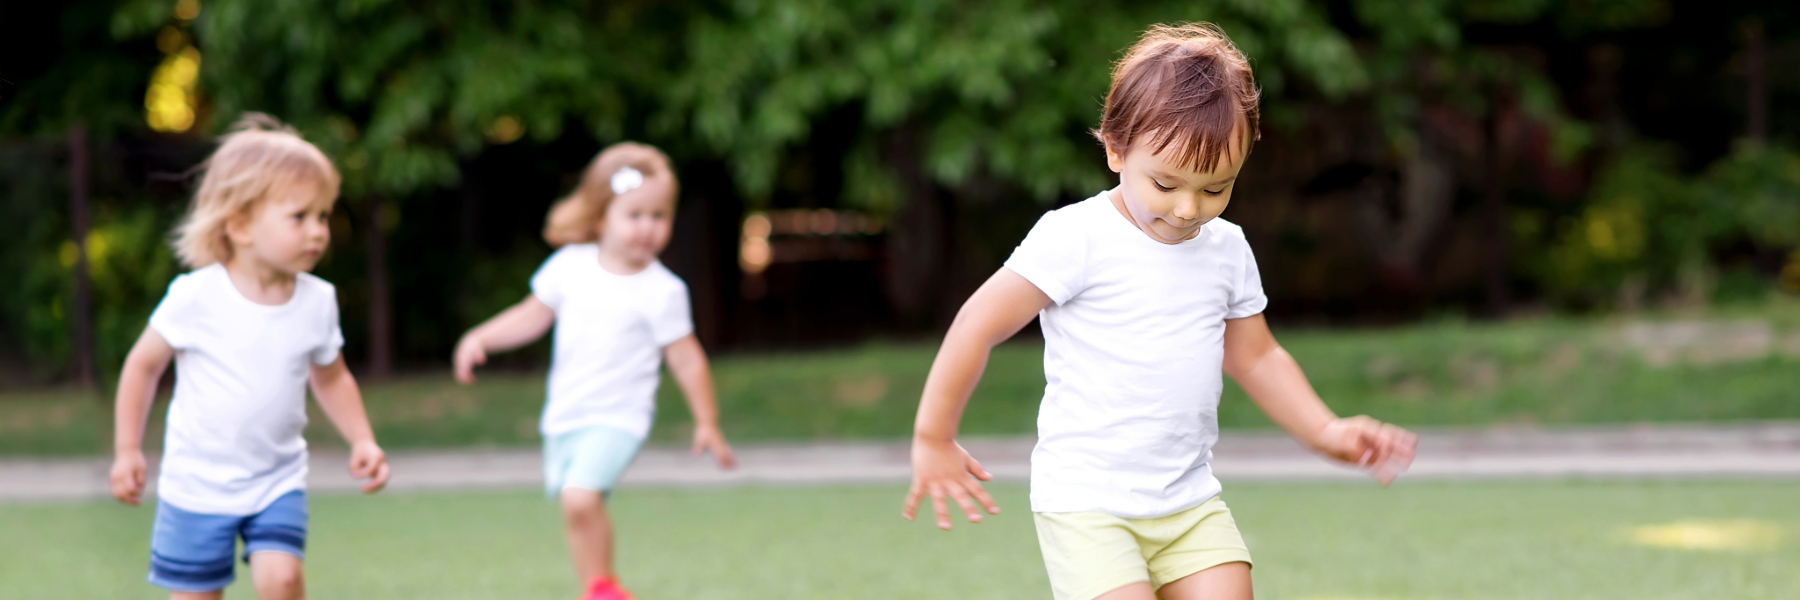 Faculty of Health study explores pros and cons of preschoolers in sports